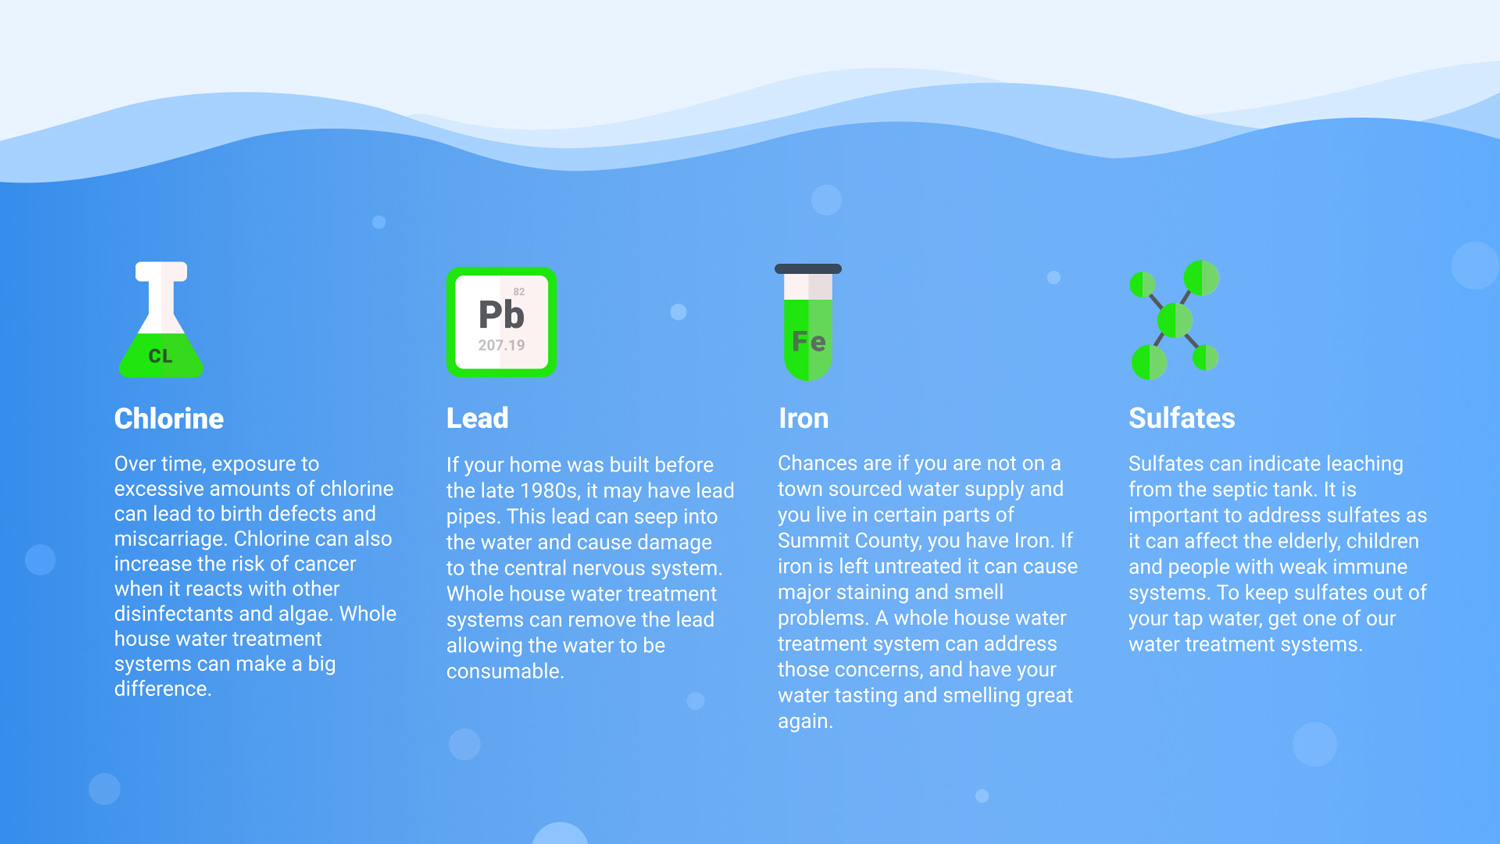 Infographic about Chlorine, Lead, Iron, and Sulfates in the water